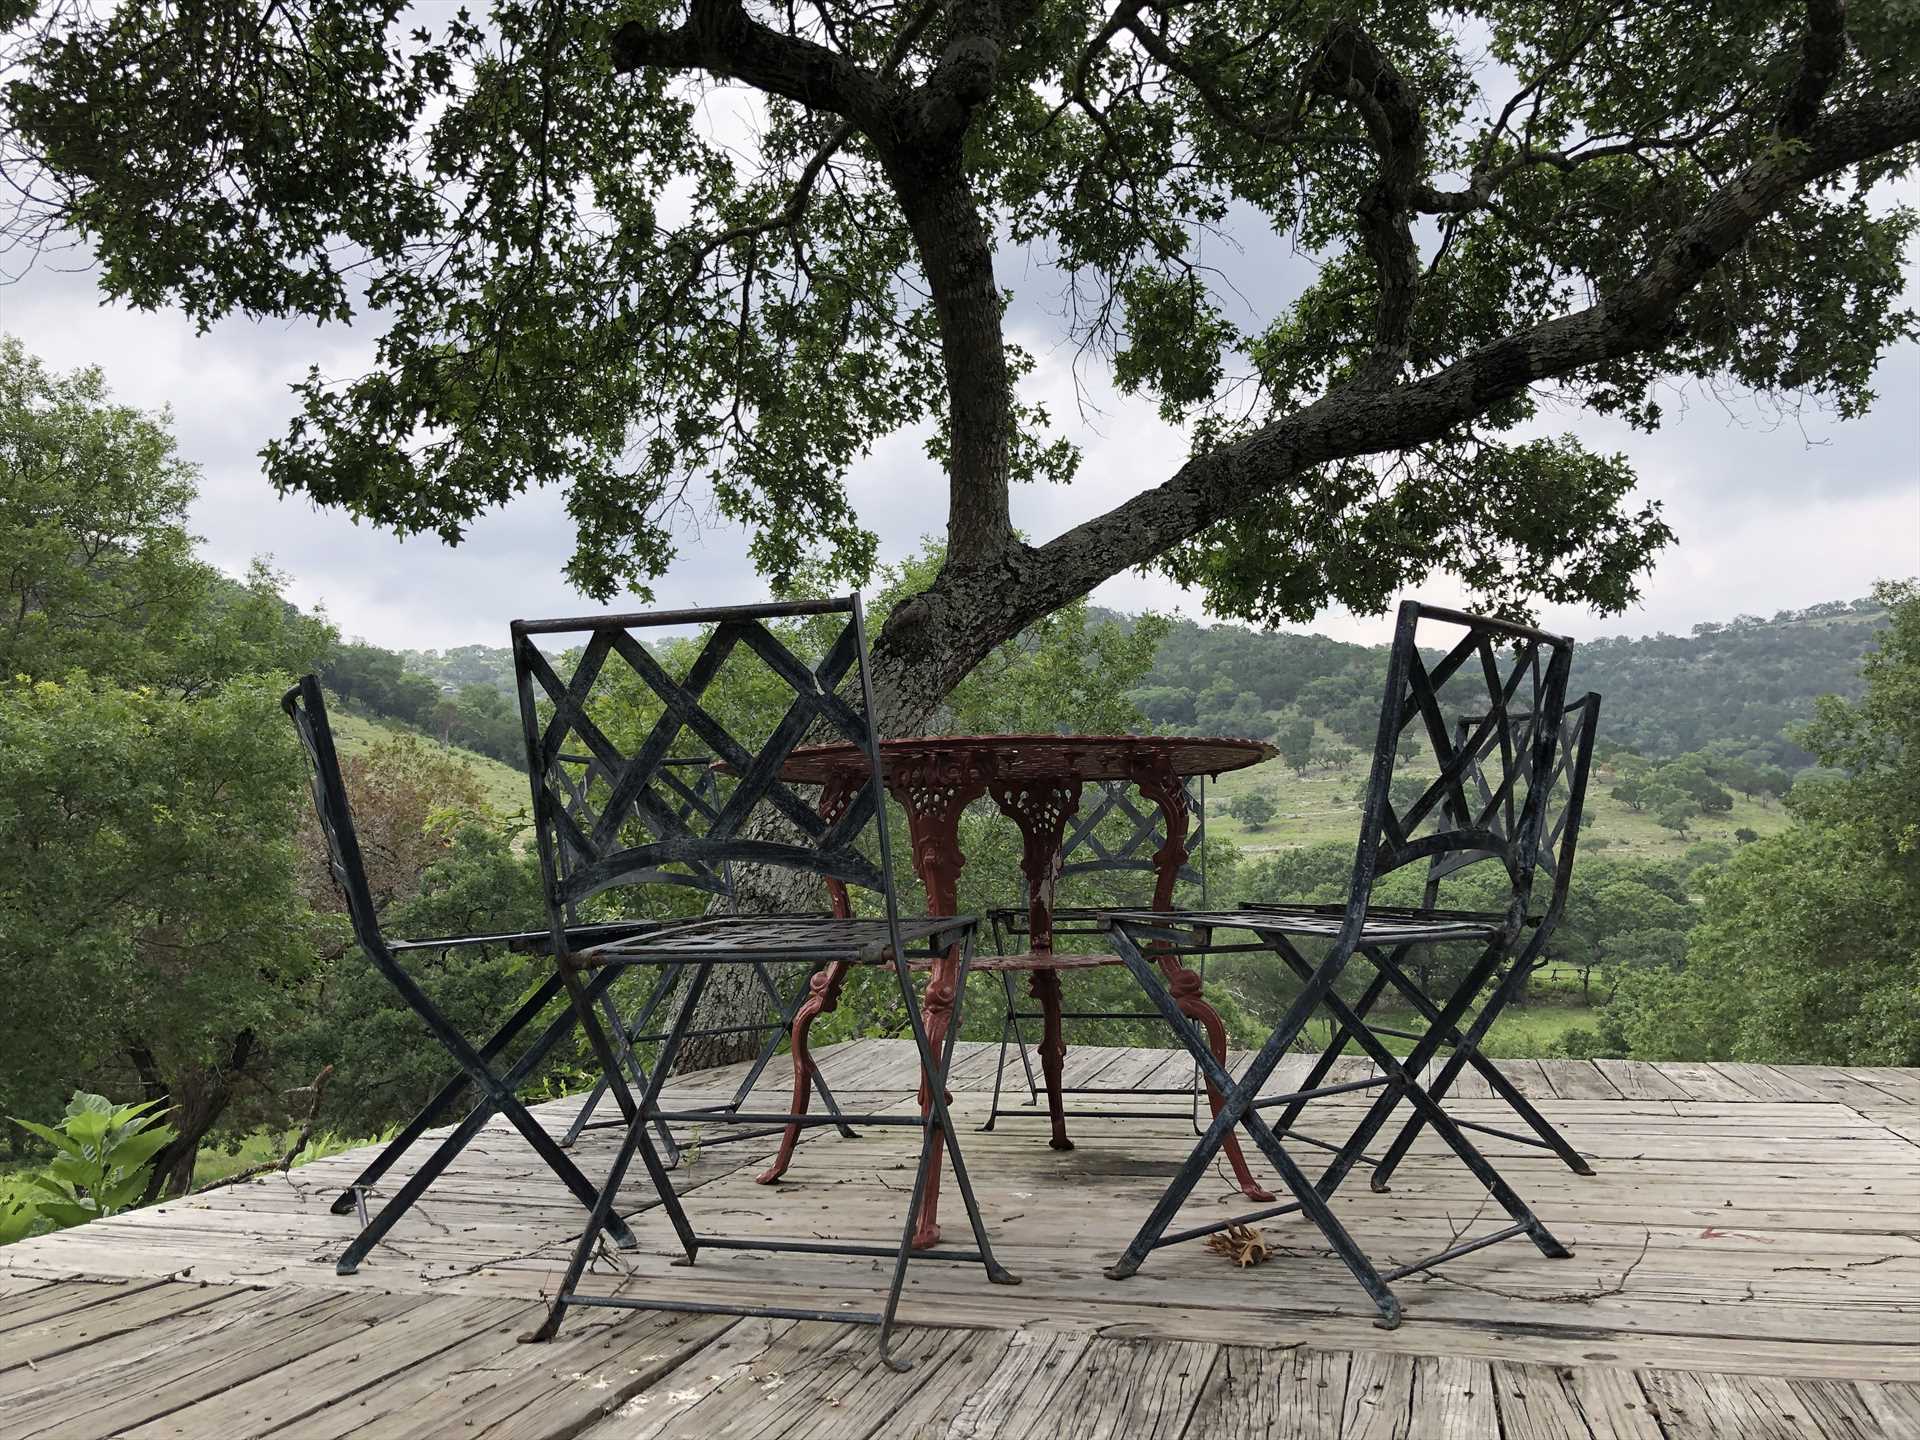                                                 Recipe for great memories: take one Hill Country view, add four close friends or family members, stir in some fresh mountain air, mix well.